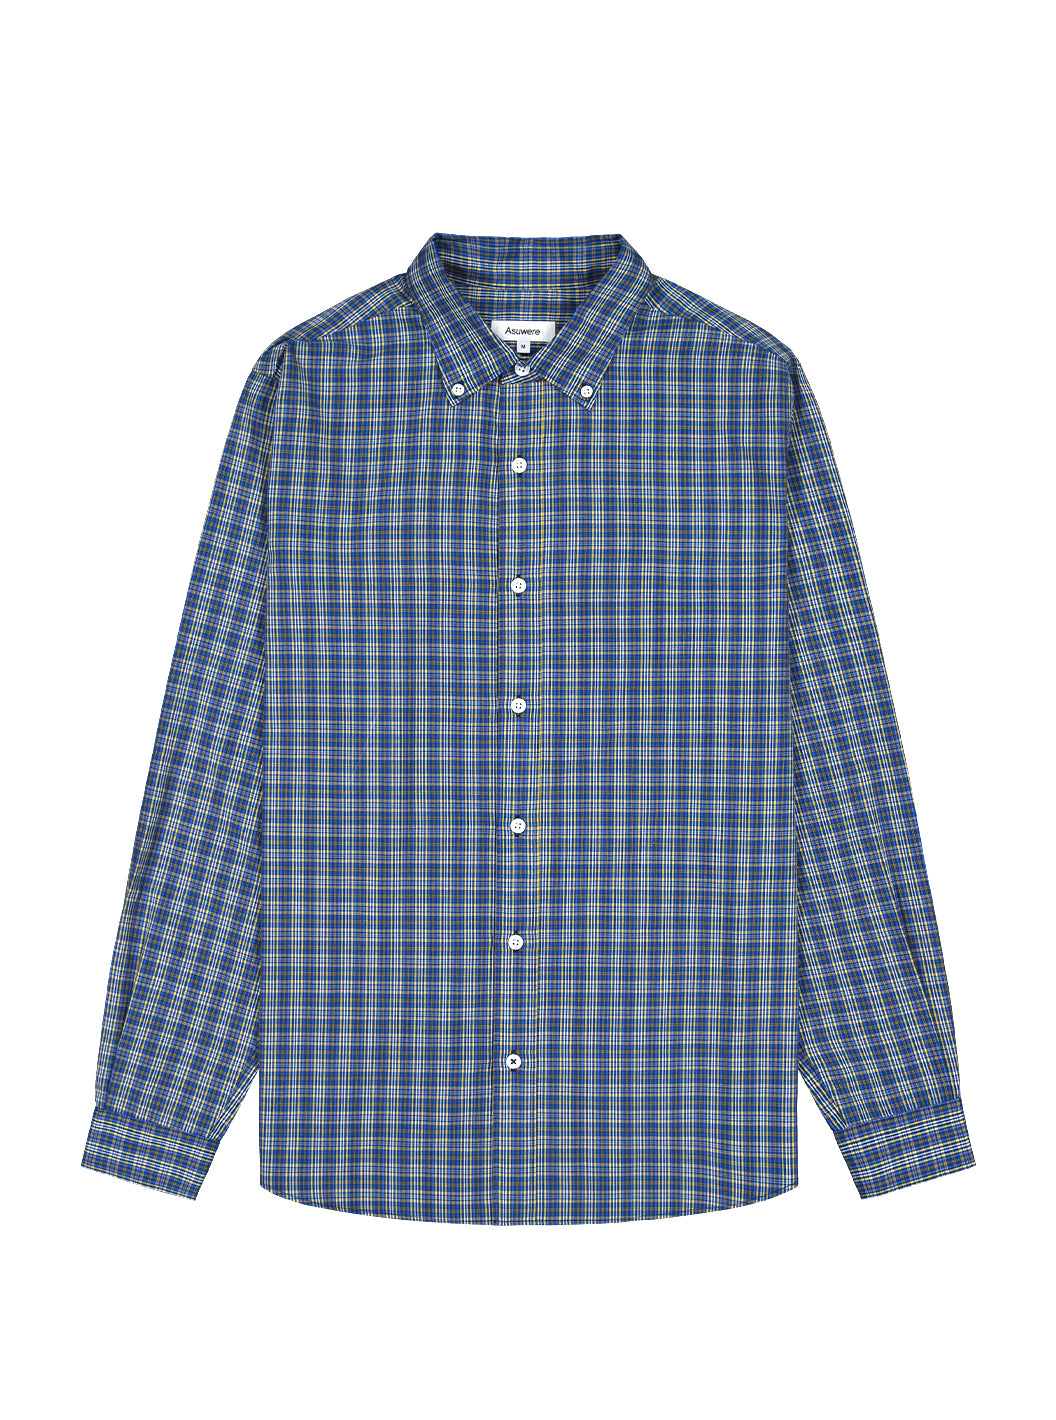 Front of Light Cotton Button Down Shirt in Navy Check against white background